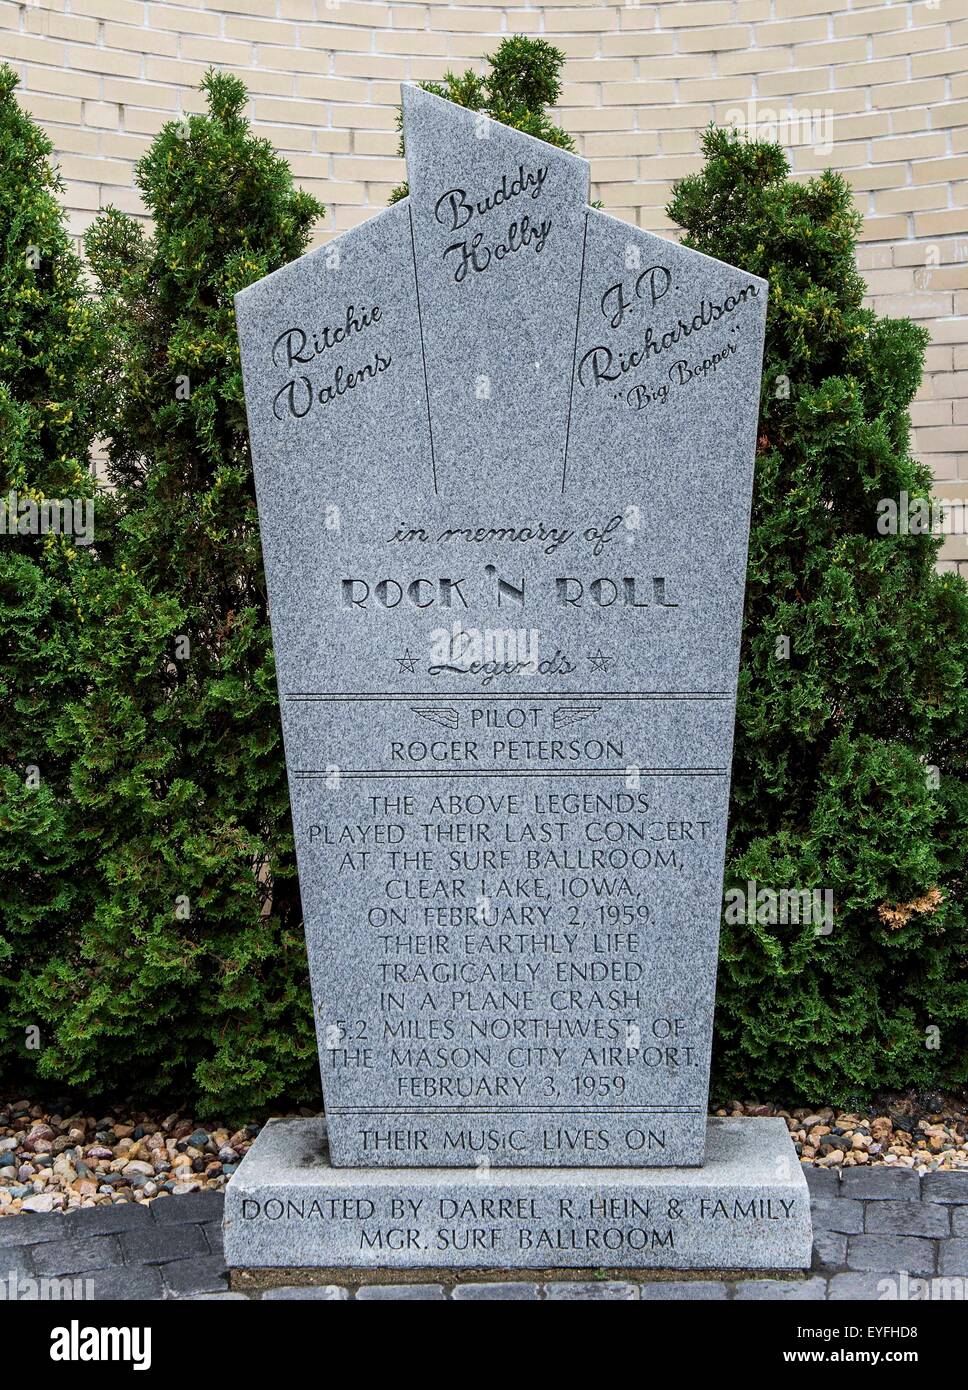 Clear Lake, Iowa, USA. 28th July, 2015. A monument outside the Surf Ballroom, the site of the last concert on the 1959 Winter Dance Party tour before the plane crash on Feb. 3 that took the lives of musicians BUDDY HOLLY, RITCHIE VALENS and J.P. ''THE BIG BOPPER'' RICHARDSON. The Surf, in business at its present location since 1948, has been lovingly maintained as one of the last remaining ballrooms in the midwest. © Brian Cahn/ZUMA Wire/Alamy Live News Stock Photo